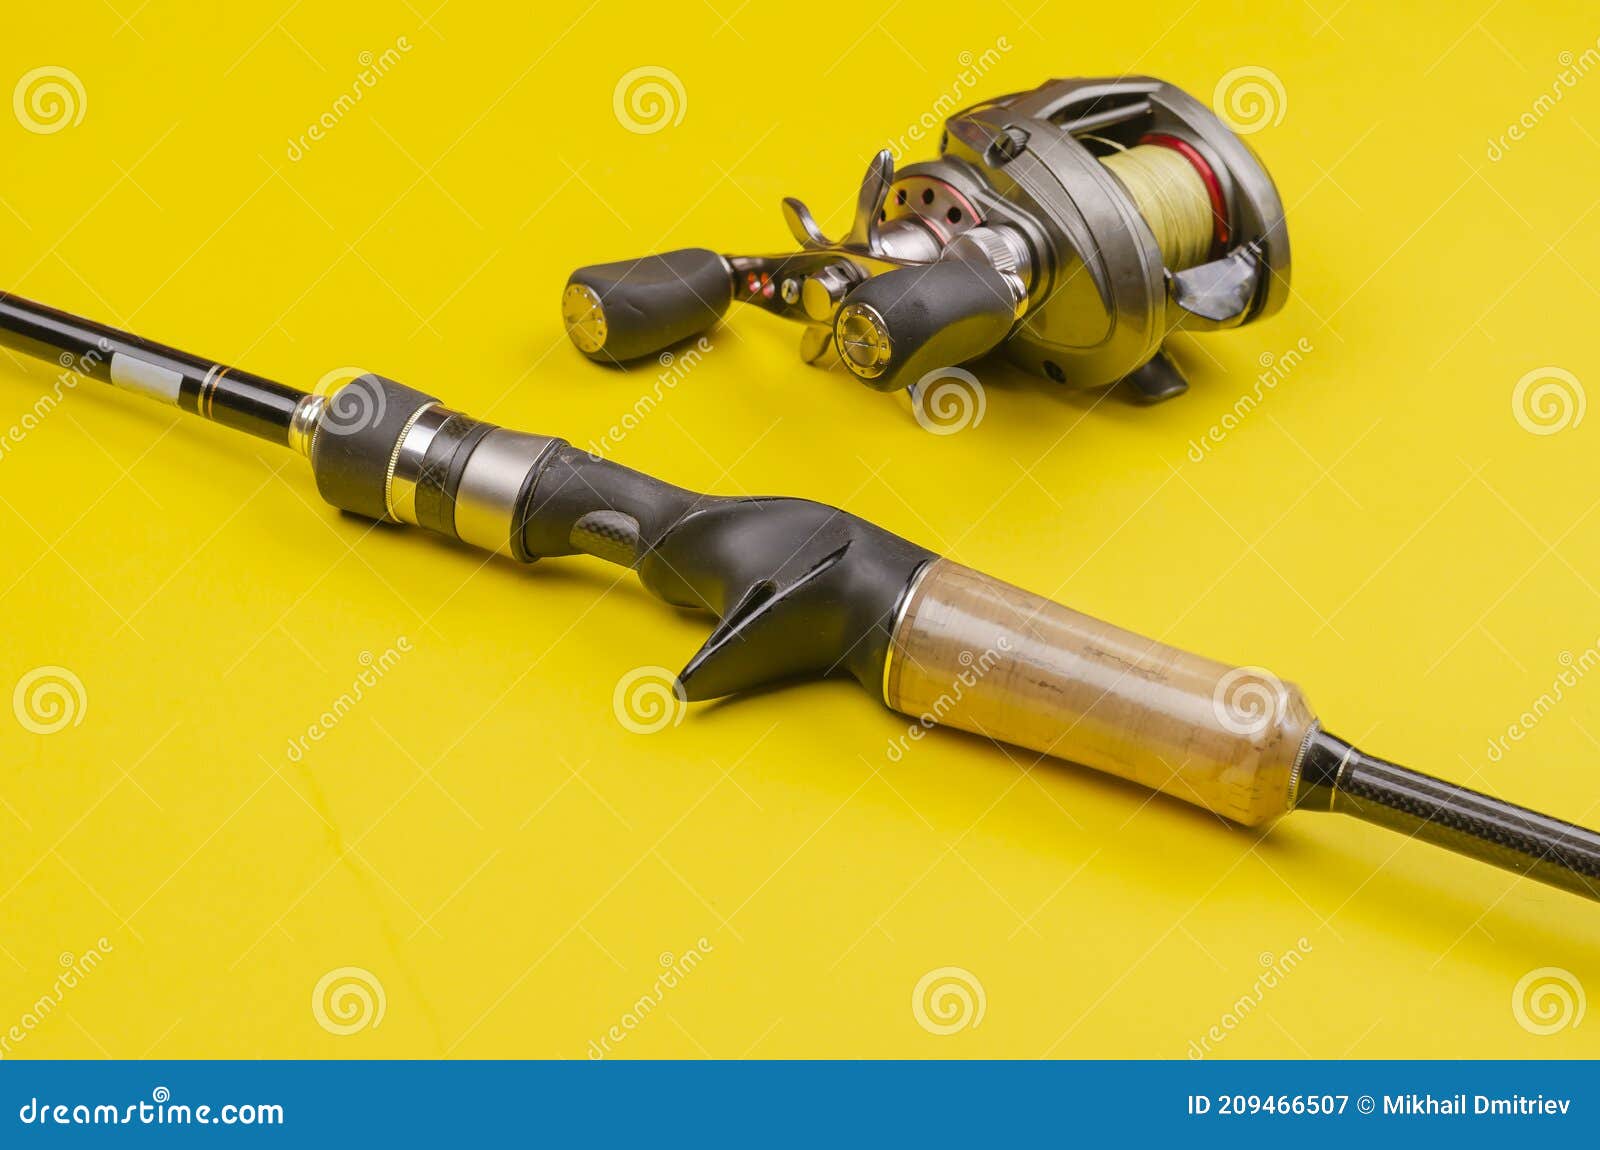 Fishing Rod and Reel on a Yellow Background Stock Image - Image of yellow,  reel: 209466507